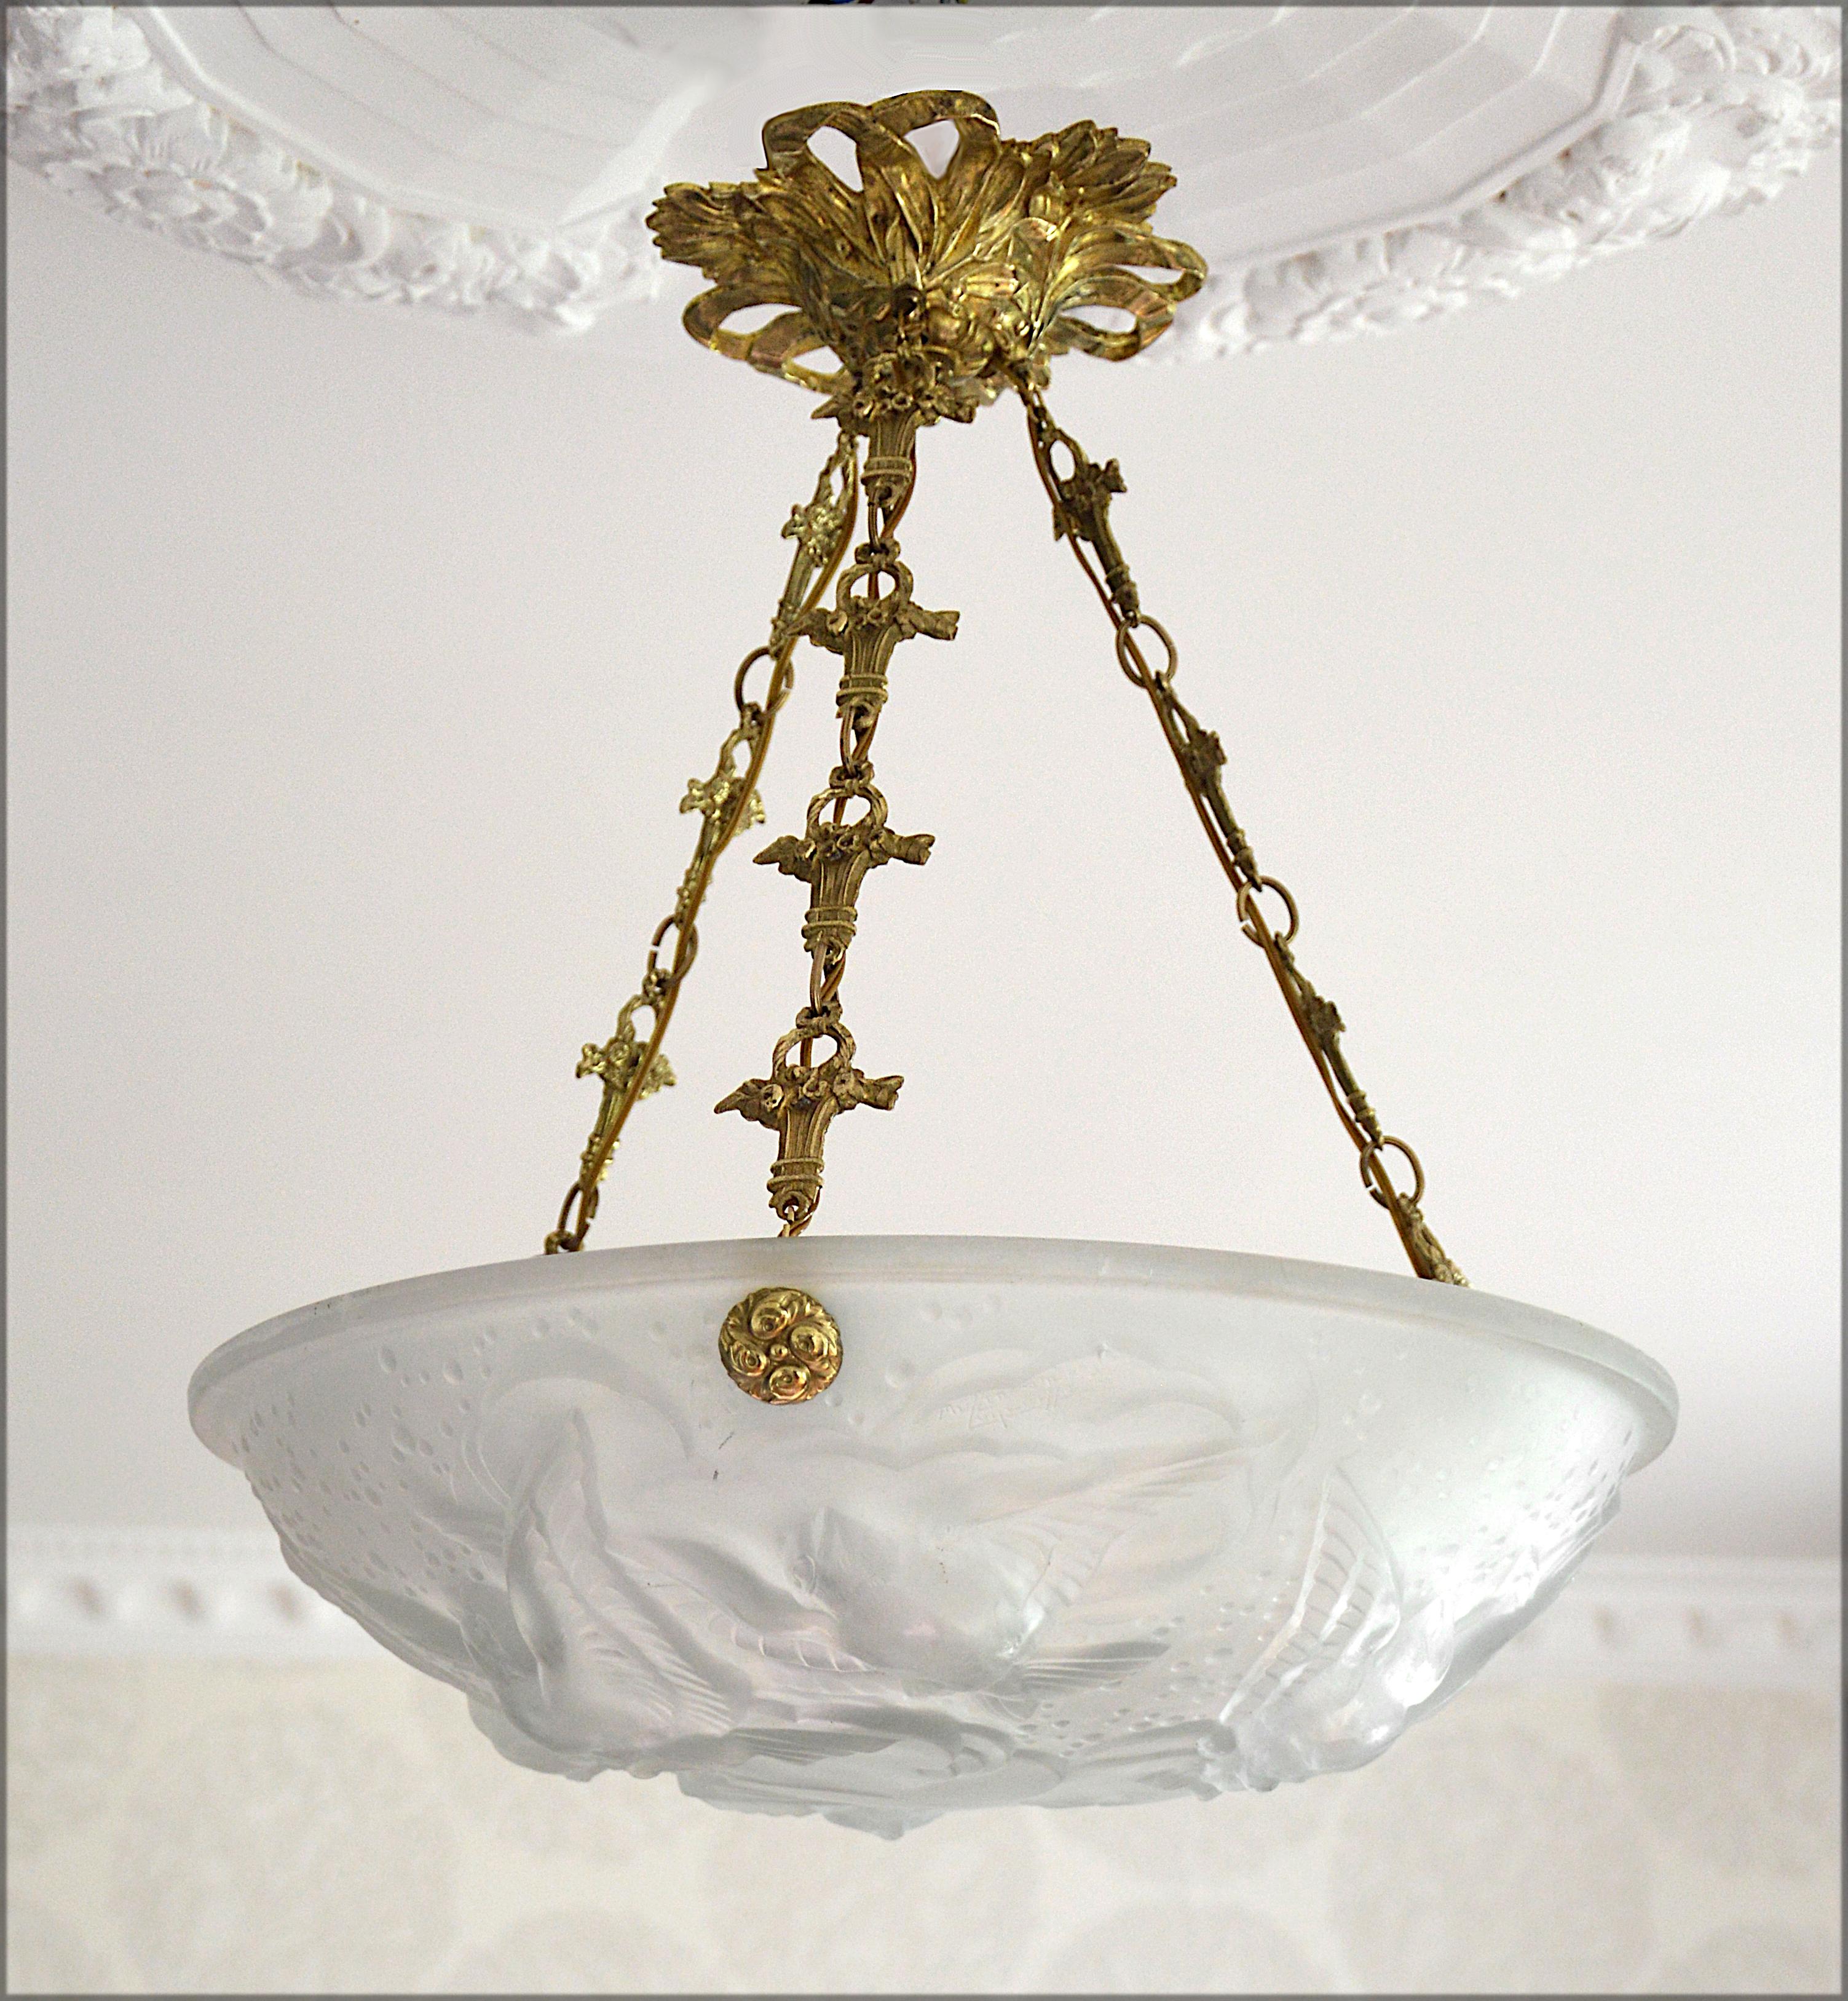 Any fair offer will be examined with the utmost attention, please send a message. French Art Deco bird pendant chandelier by Muller Freres (Luneville), France, late 1920s. Glass and bronze. Molded glass shade showing 6 birds in the sky (clouds).